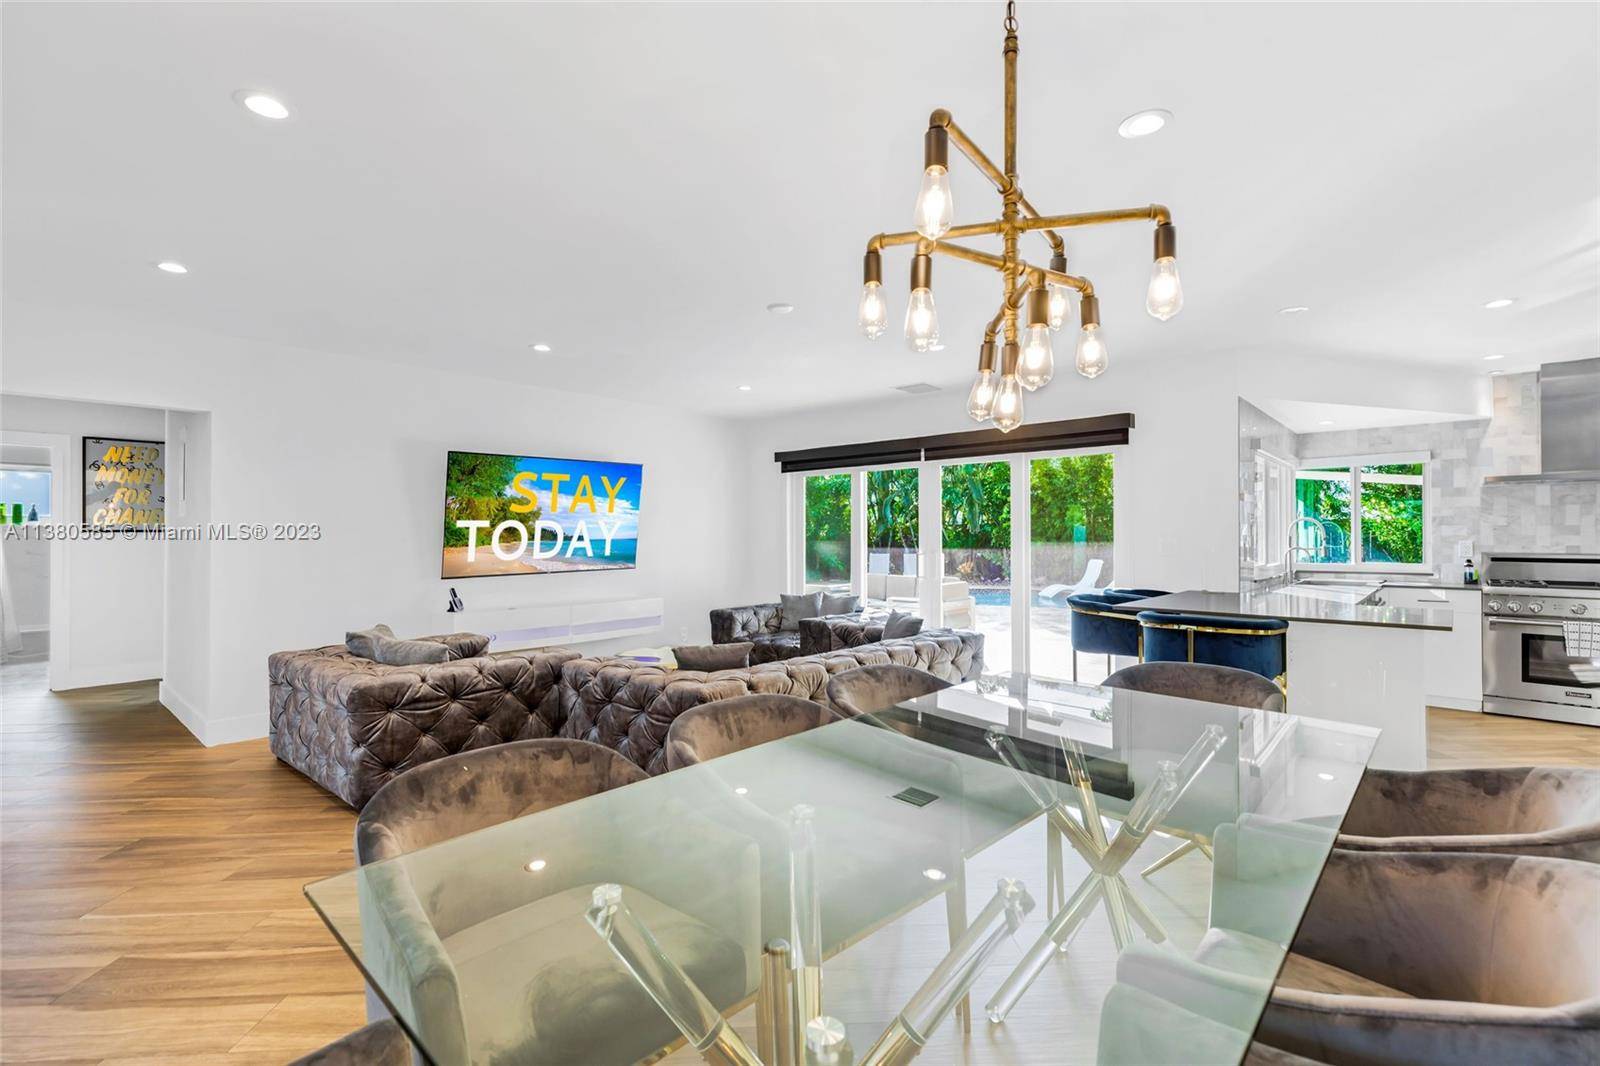 Discover the charm of this fabulous contemporary residence in Fort Lauderdale, situated only a few minutes away from the beach and popular dining destinations.